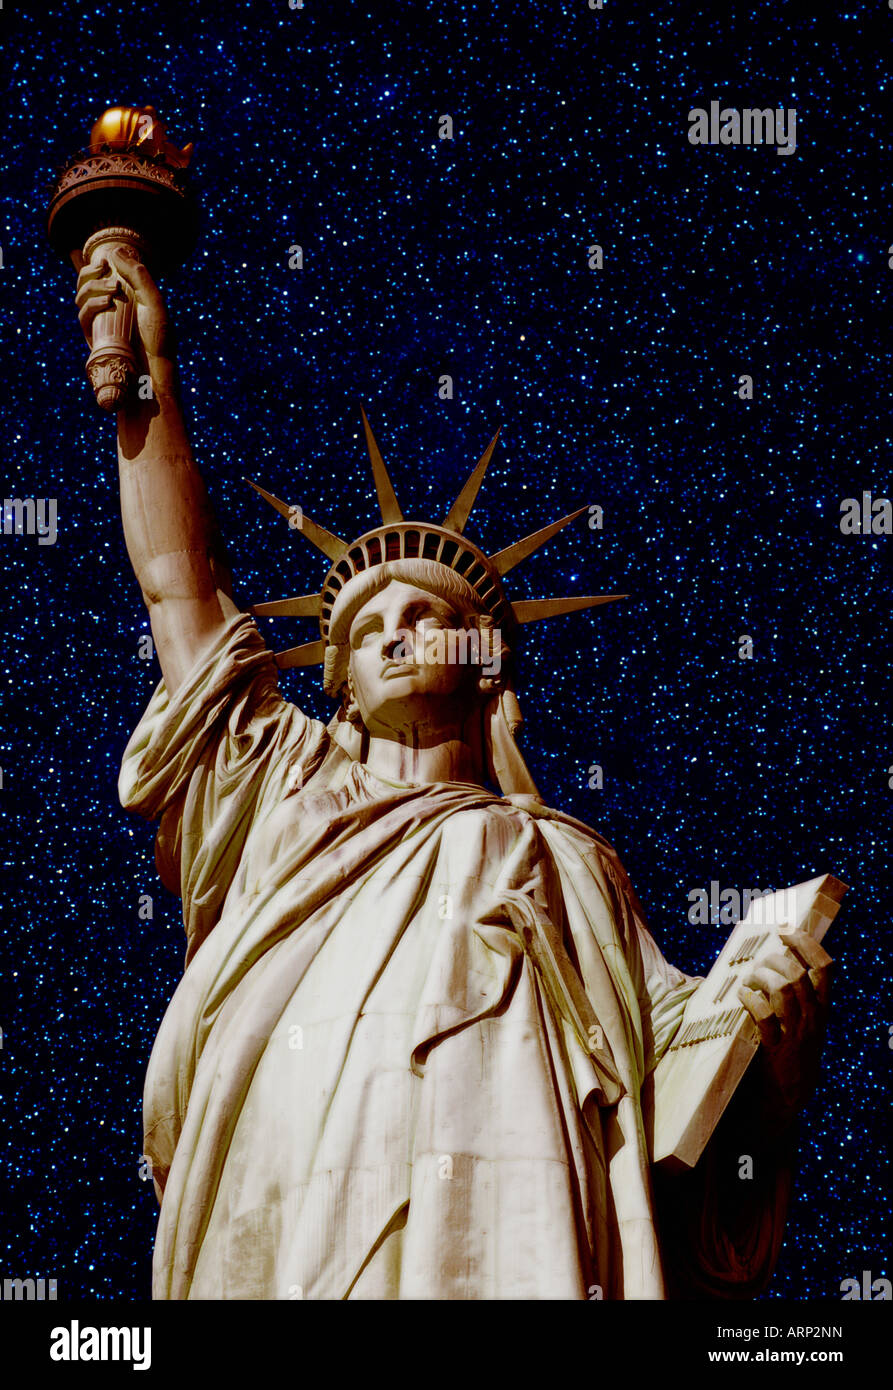 USA, New York City, Statue of Liberty,  with star field effect Stock Photo